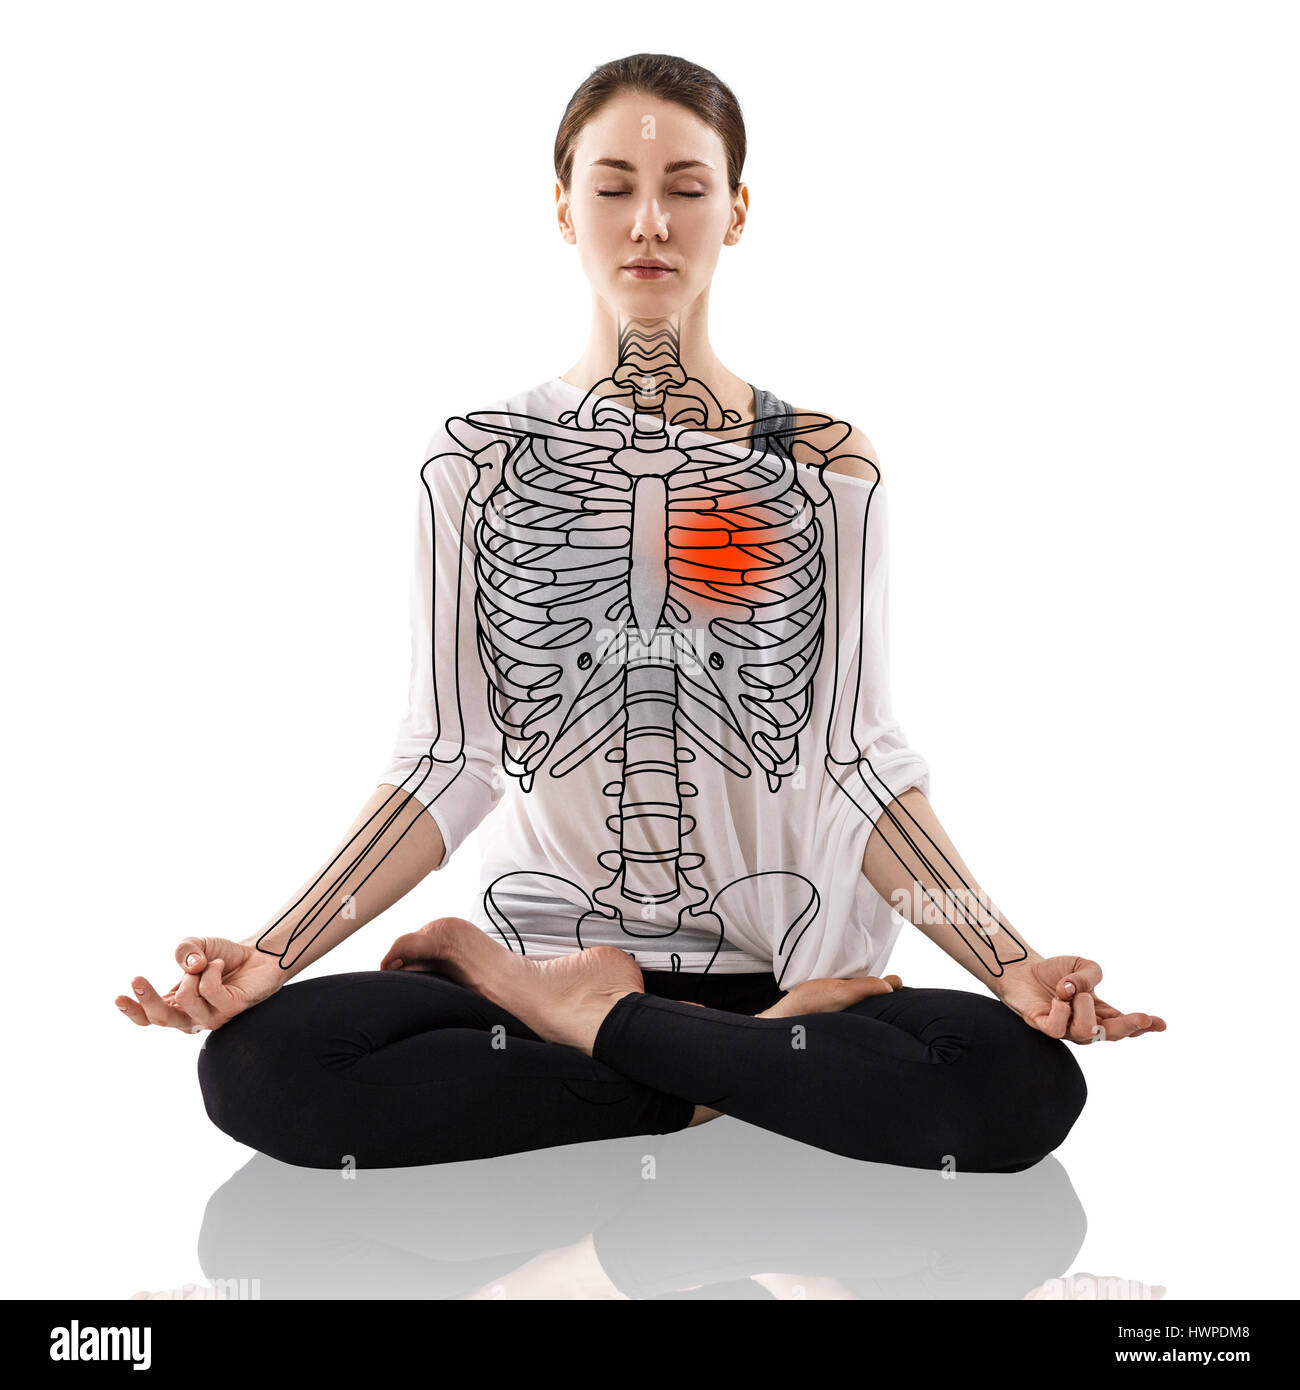 Woman in a yoga pose, with drawing skeleton over white background. Stock Photo